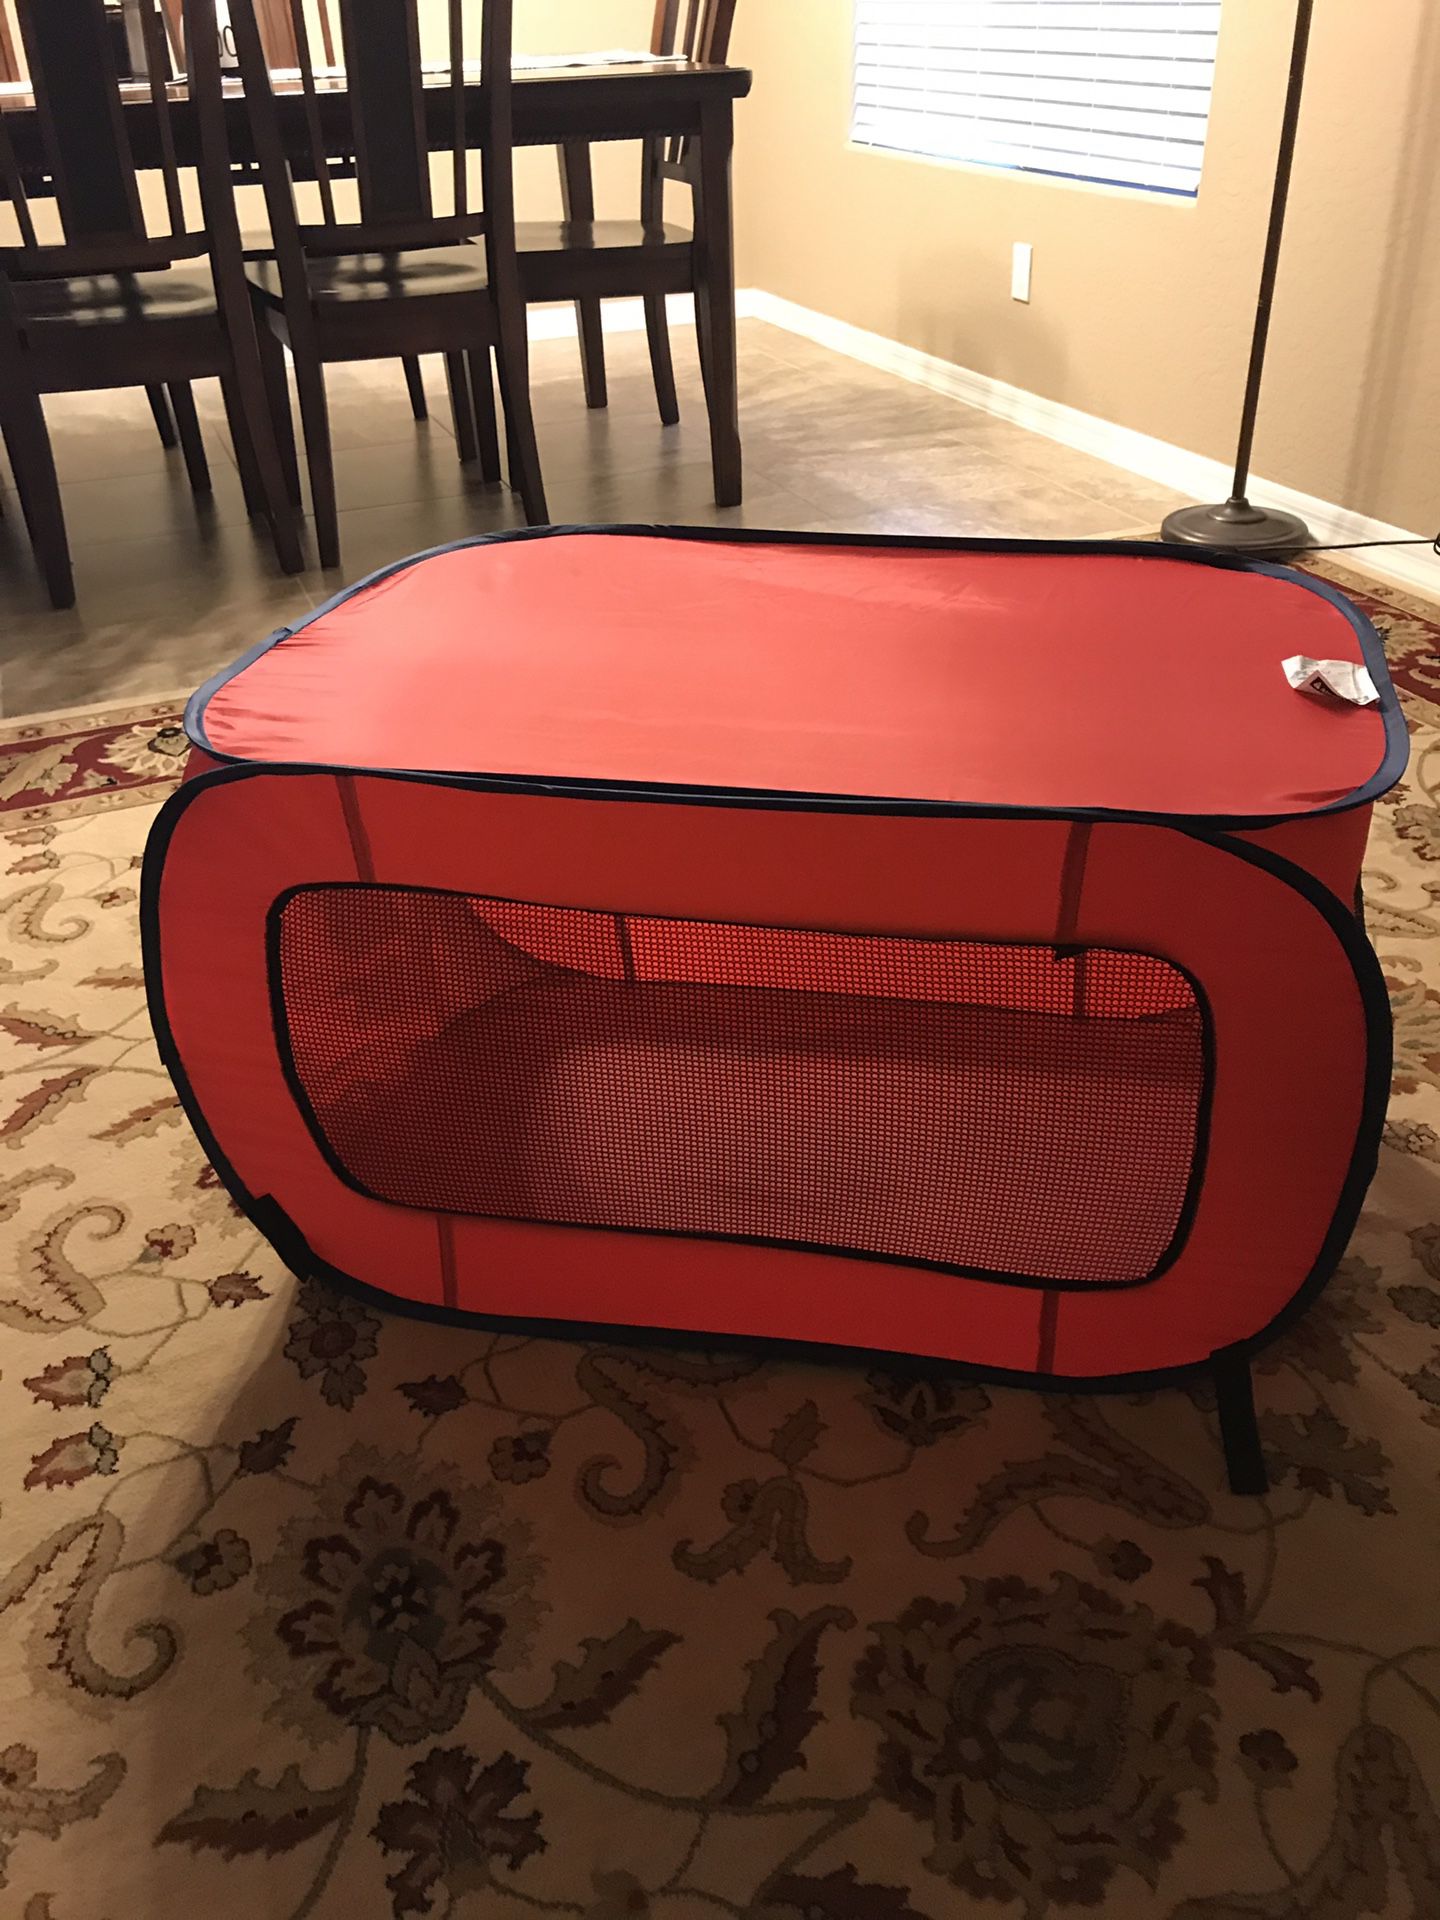 Medium sized portable dog kennel up to 25lbs dog weight